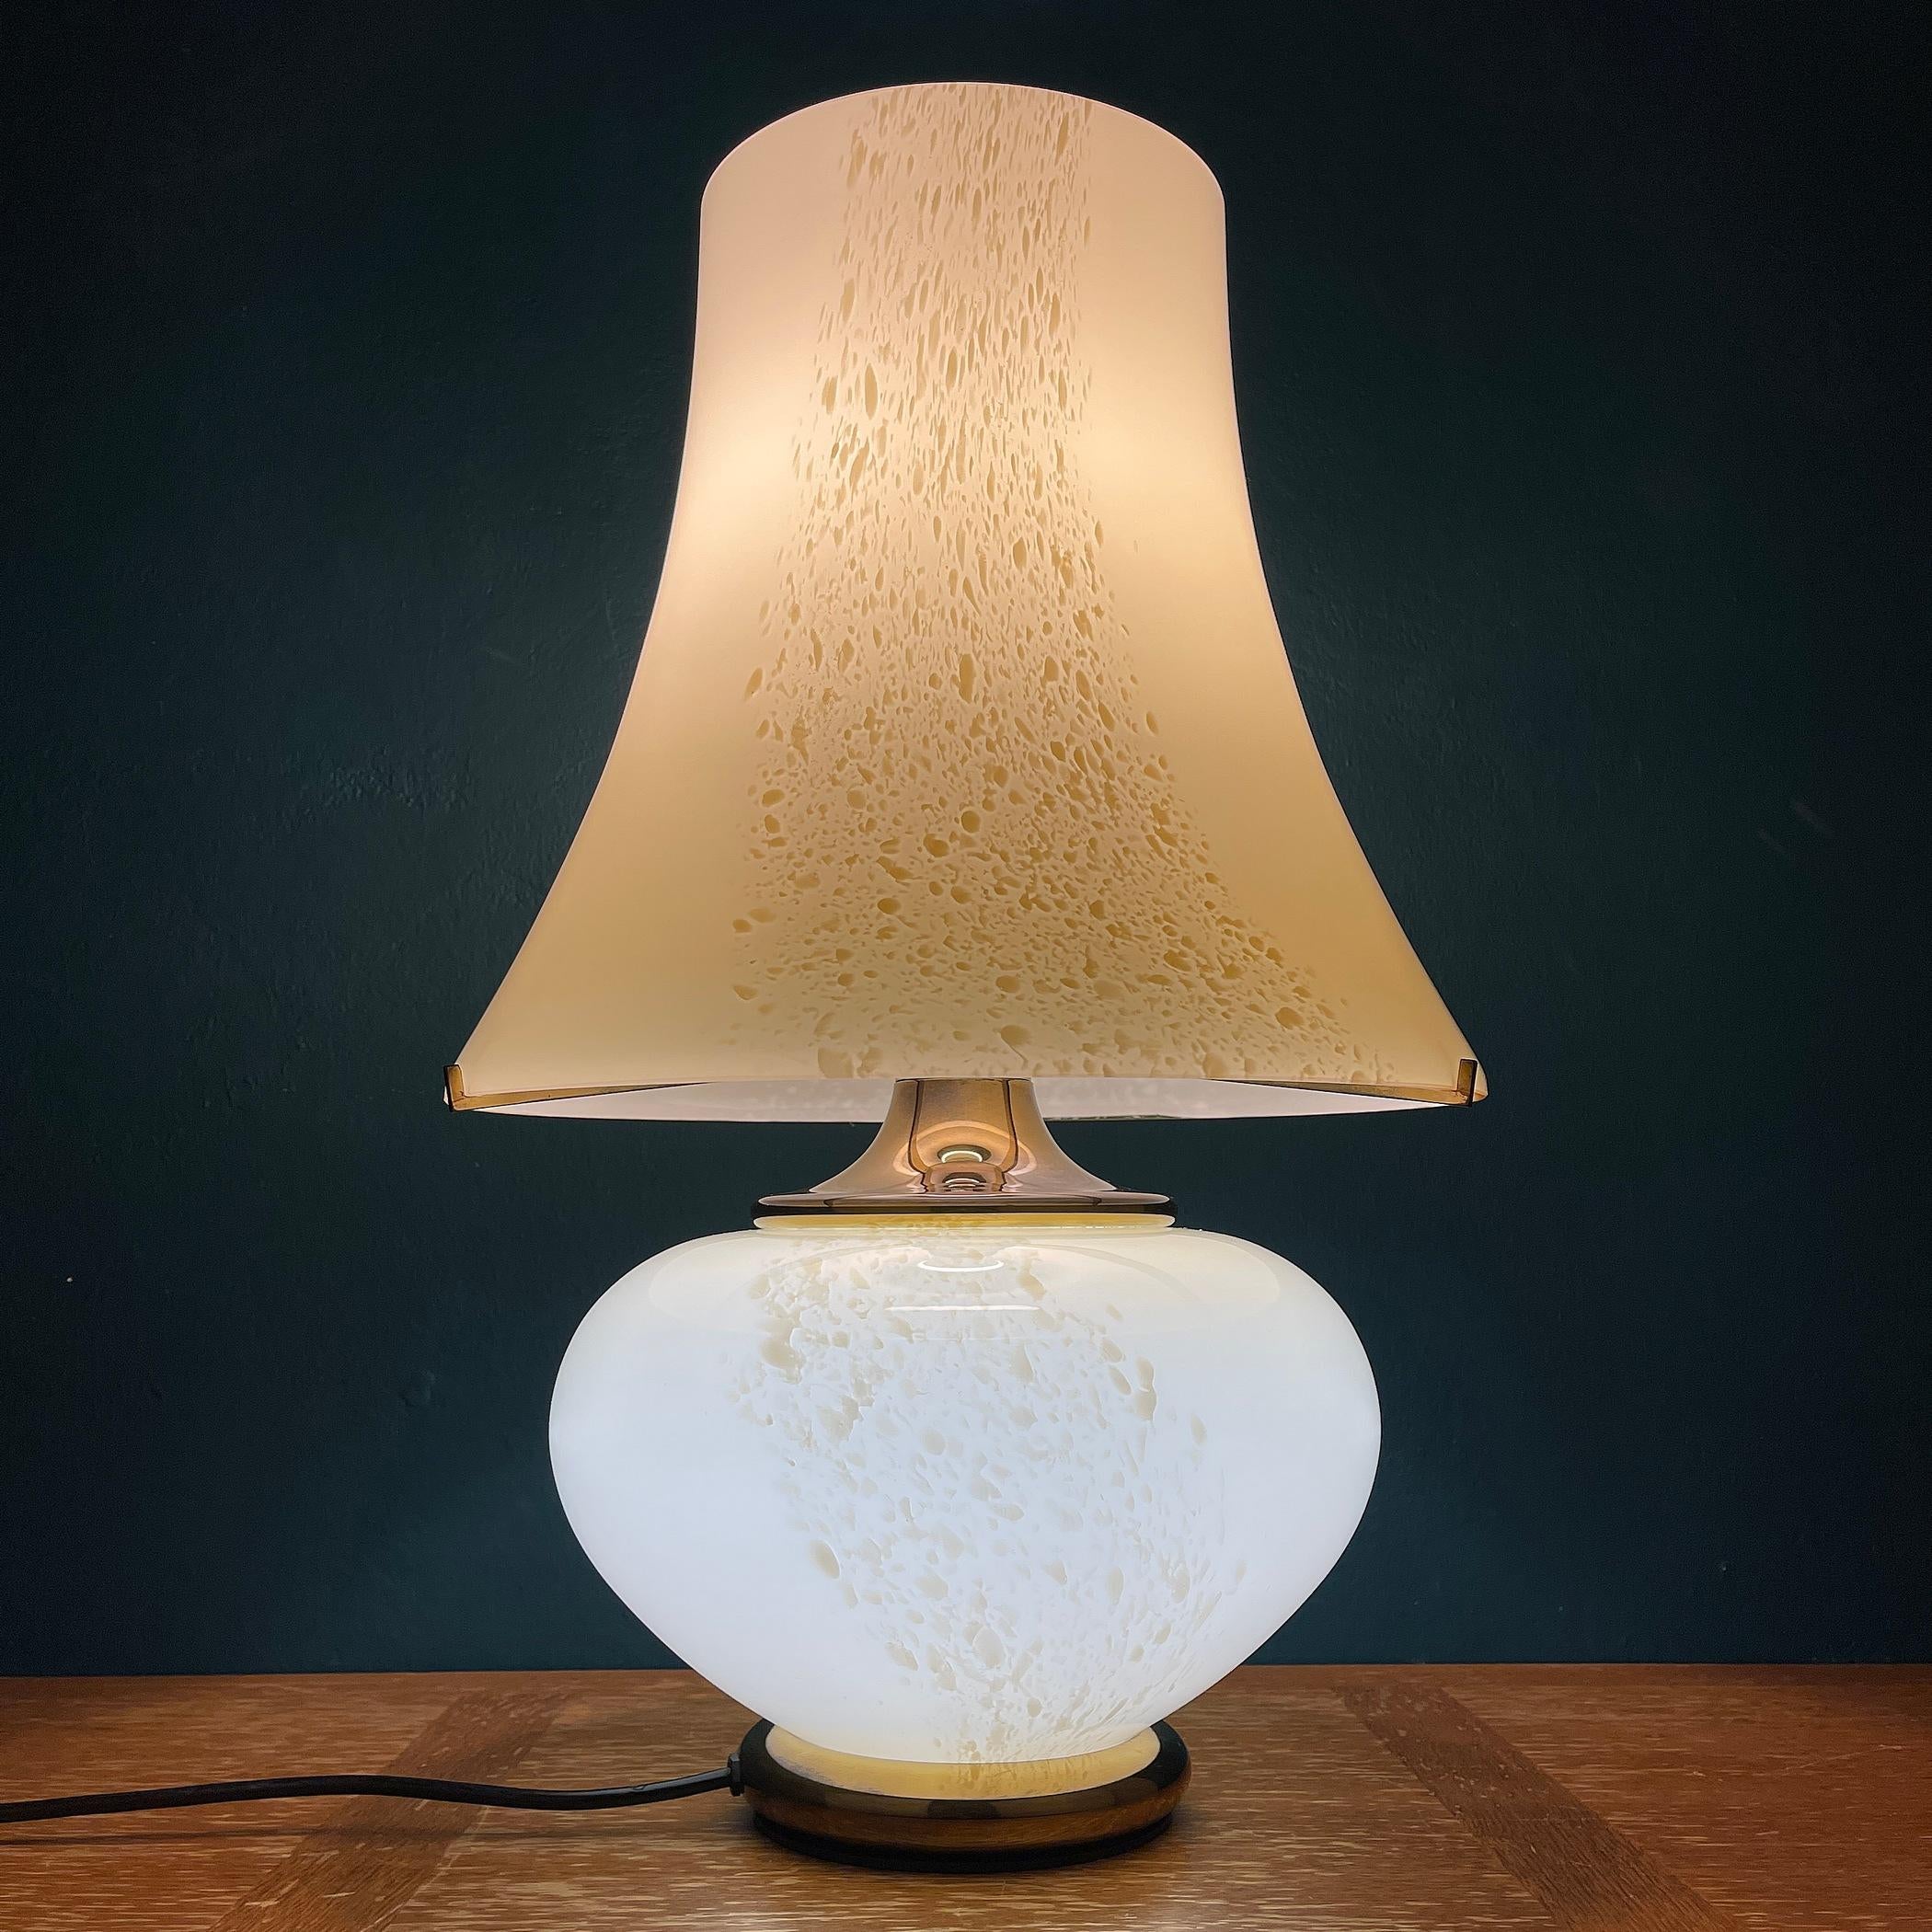 Large Murano glass table lamp Mushroom by F.Fabbian made in Italy in the 1970s. F.Fabbian was established in 1961 as a company manufacturing lighting appliances for residential and commercial purposes. Since May 2018, Fabbian has changed owners: it